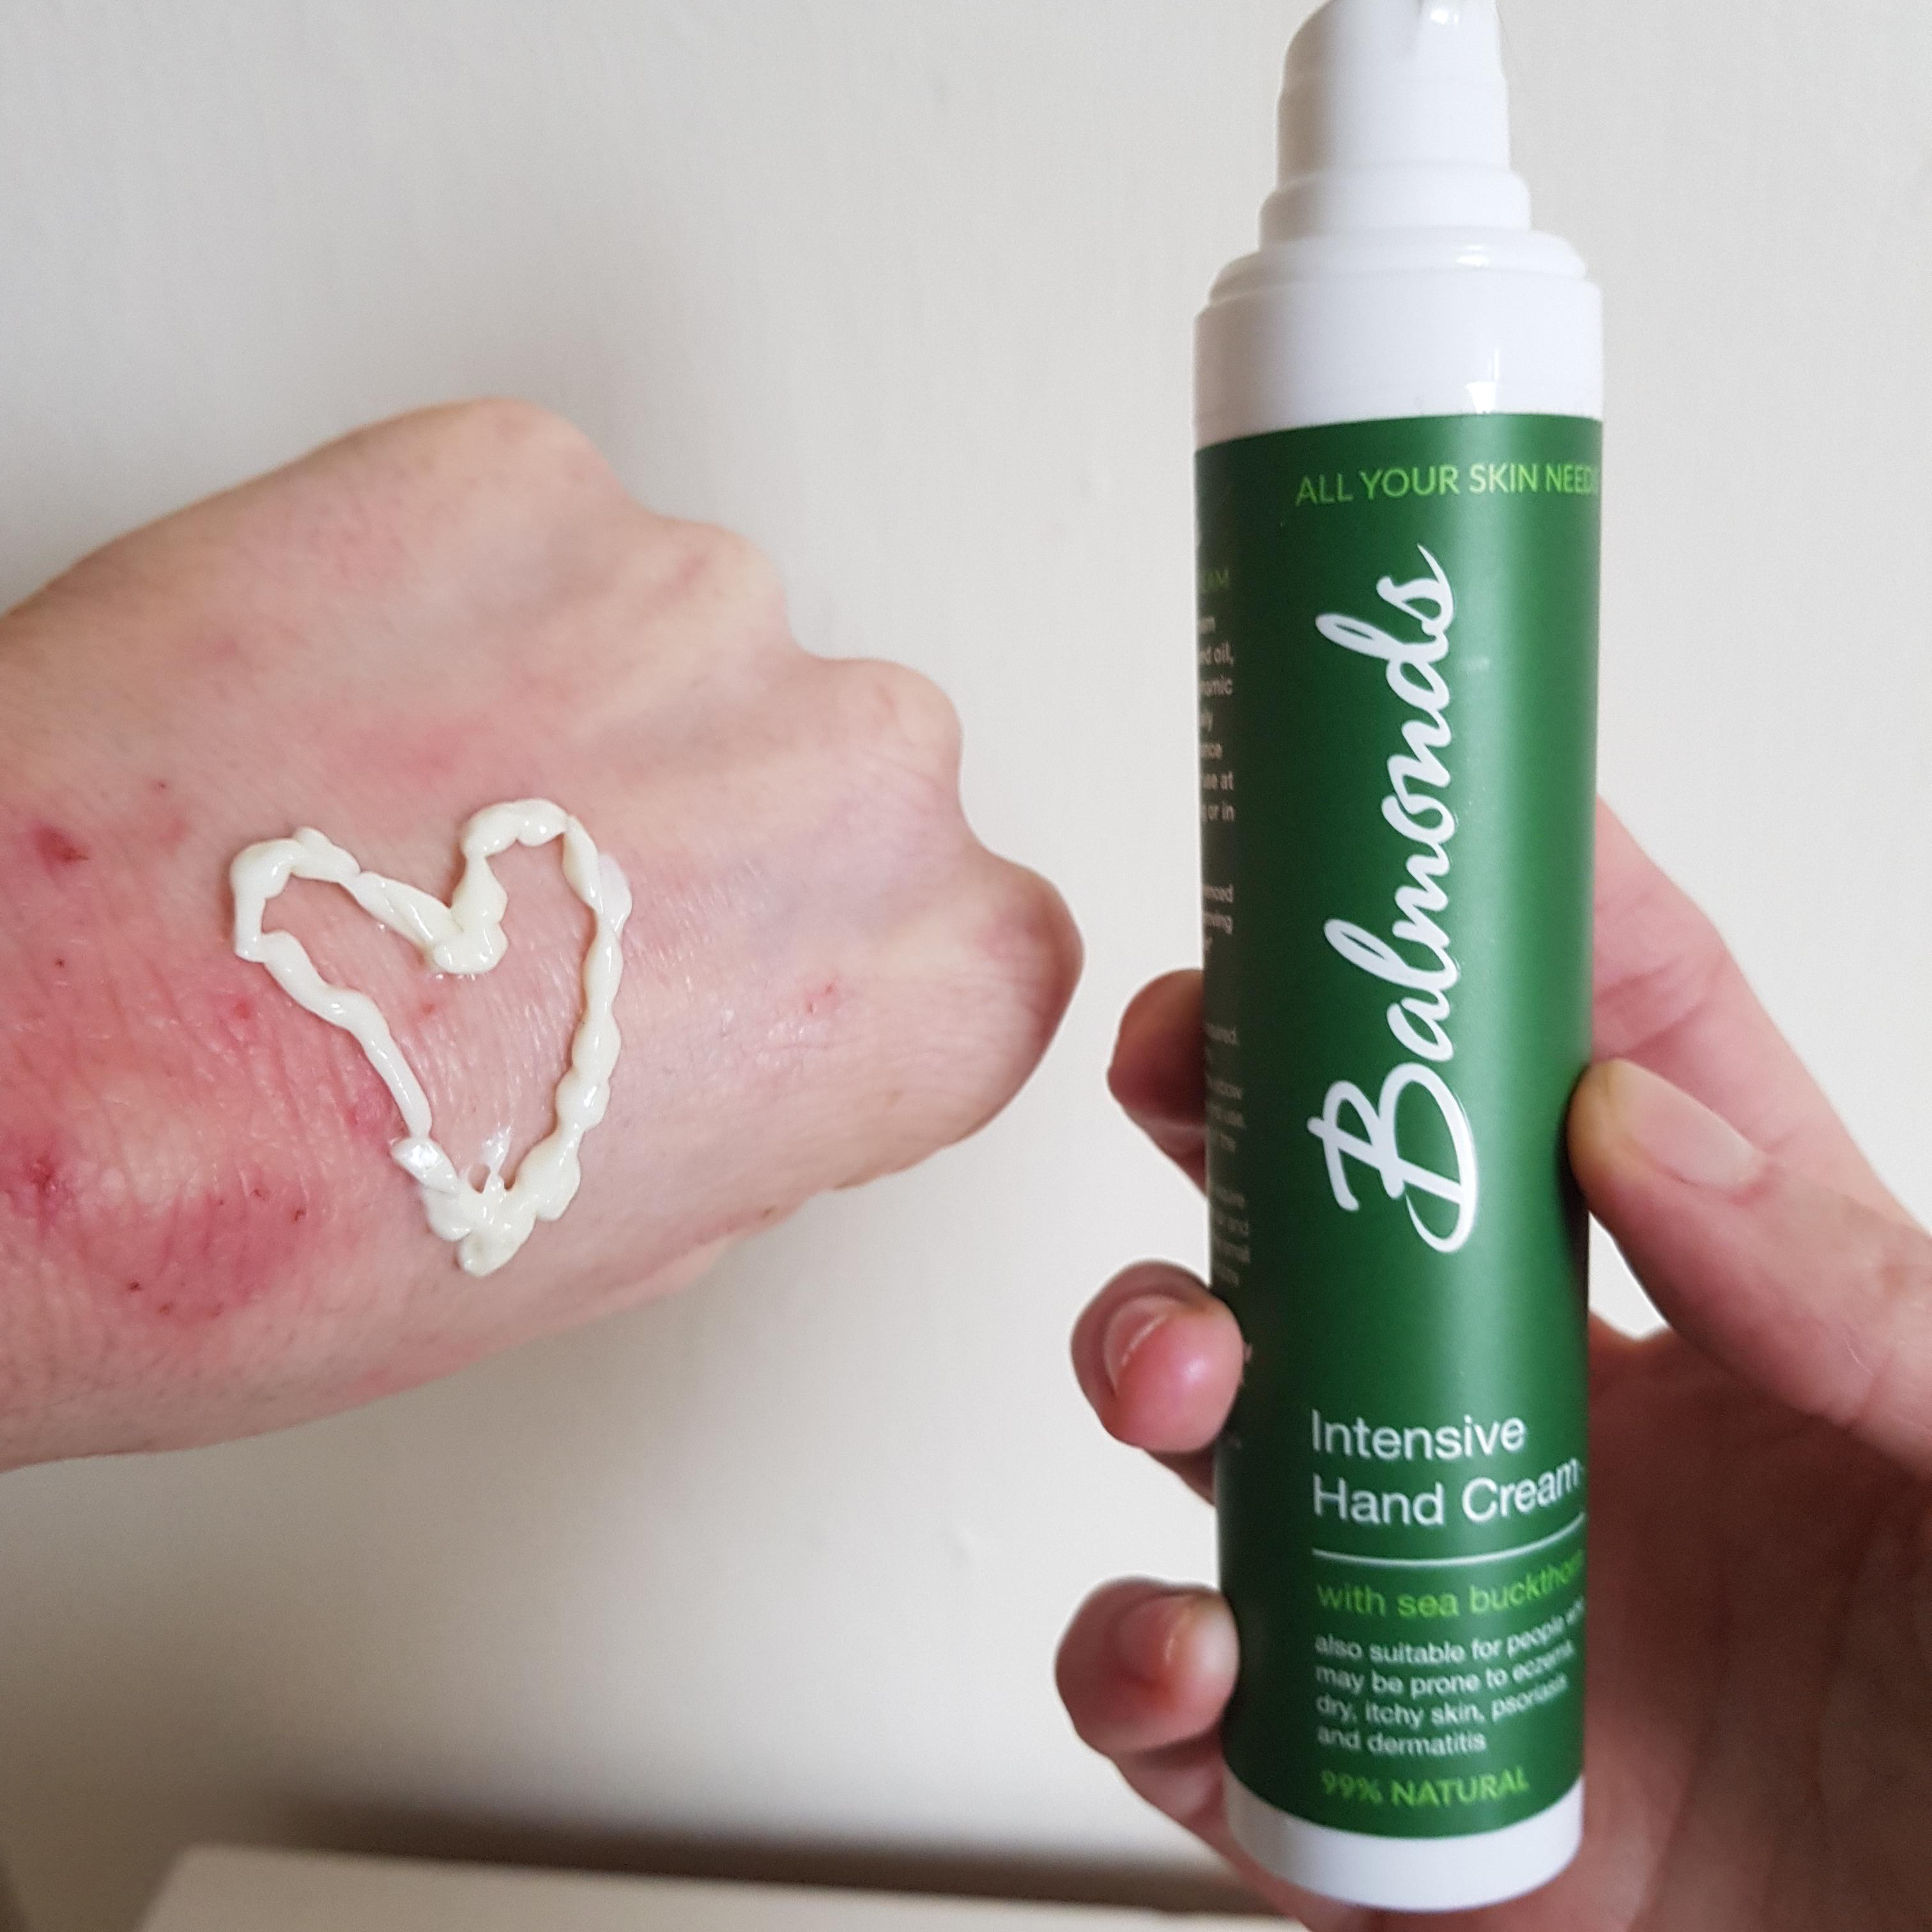 Balmonds hand cream tube next to hand with cream on in a heart shape